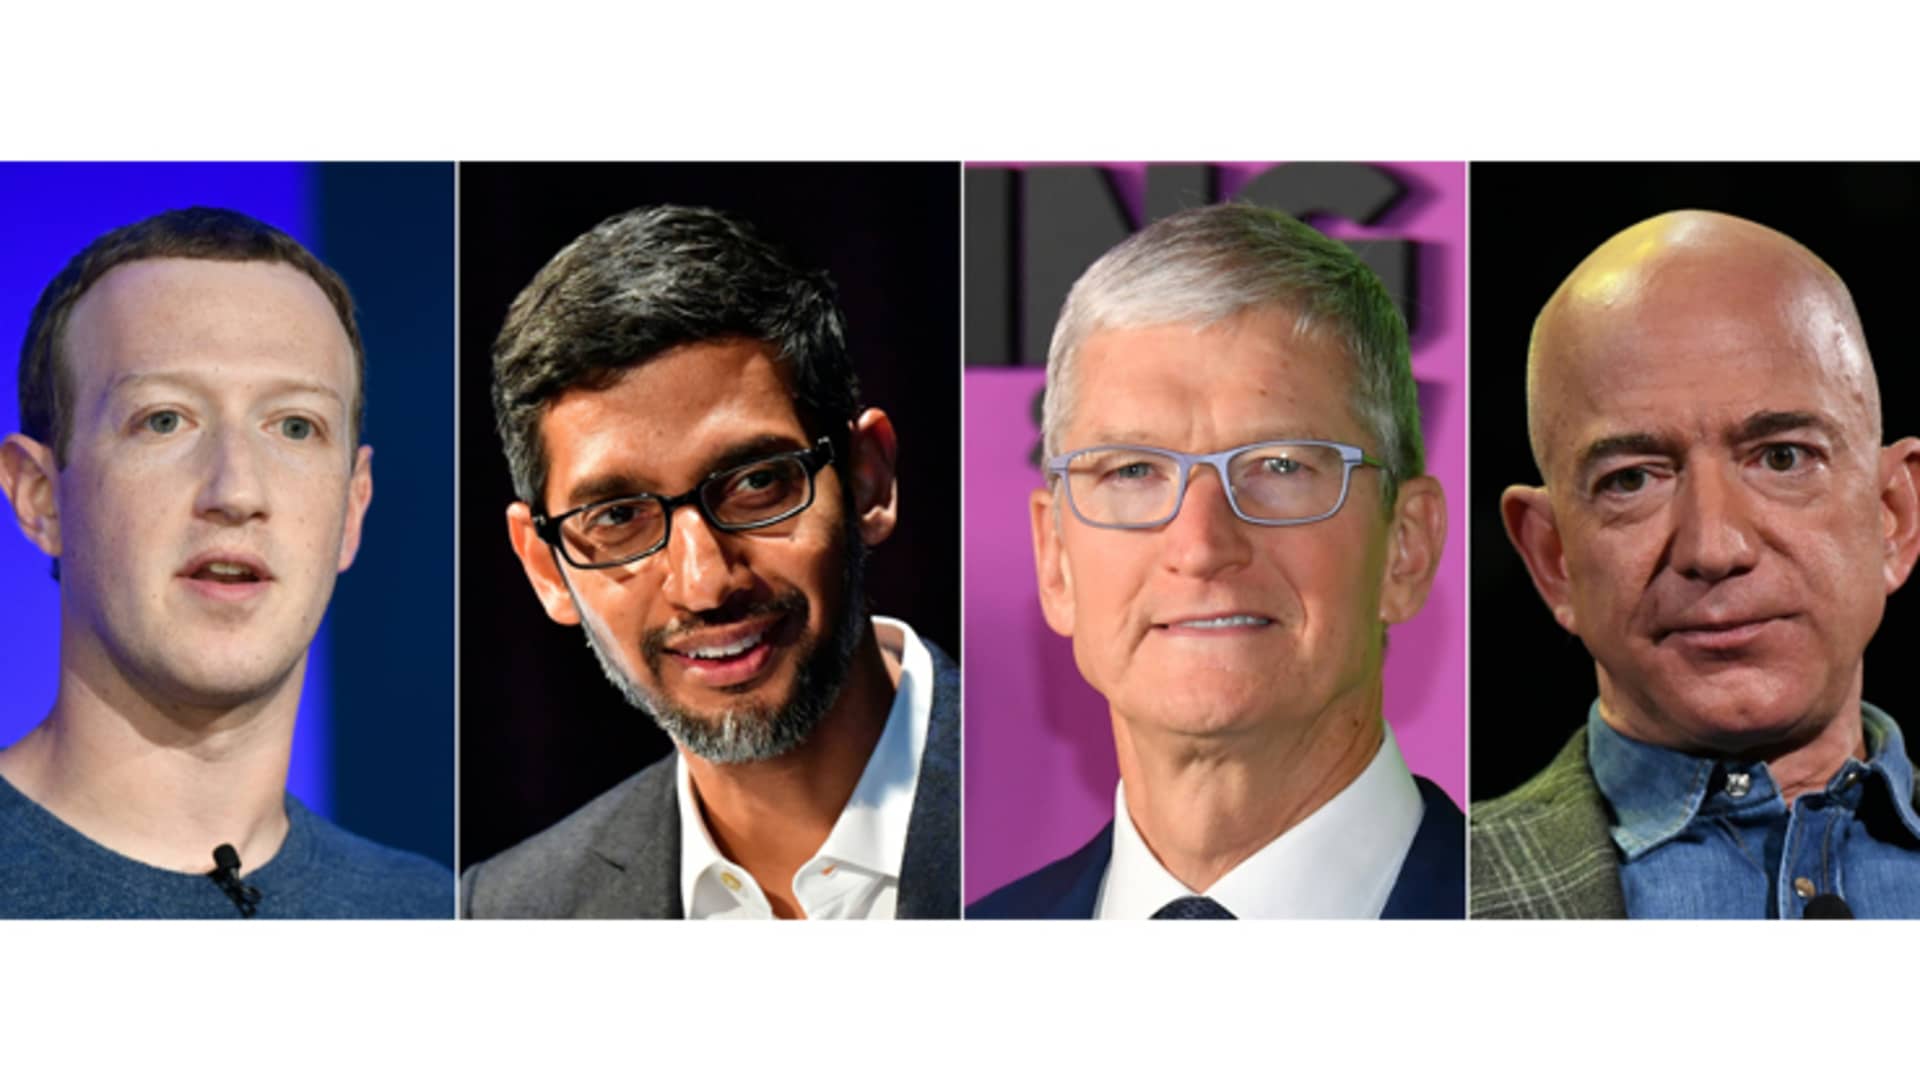 (COMBO) This combination of pictures created on July 07, 2020 shows (L-R) Facebook CEO Mark Zuckerberg in Paris on May 23, 2018, Google CEO Sundar Pichai Berlin on January 22, 2019, Apple CEO Tim Cook on October 28, 2019 in New York and Amazon Founder and CEO Jeff Bezos in Las Vegas, Nevada on June 6, 2019.